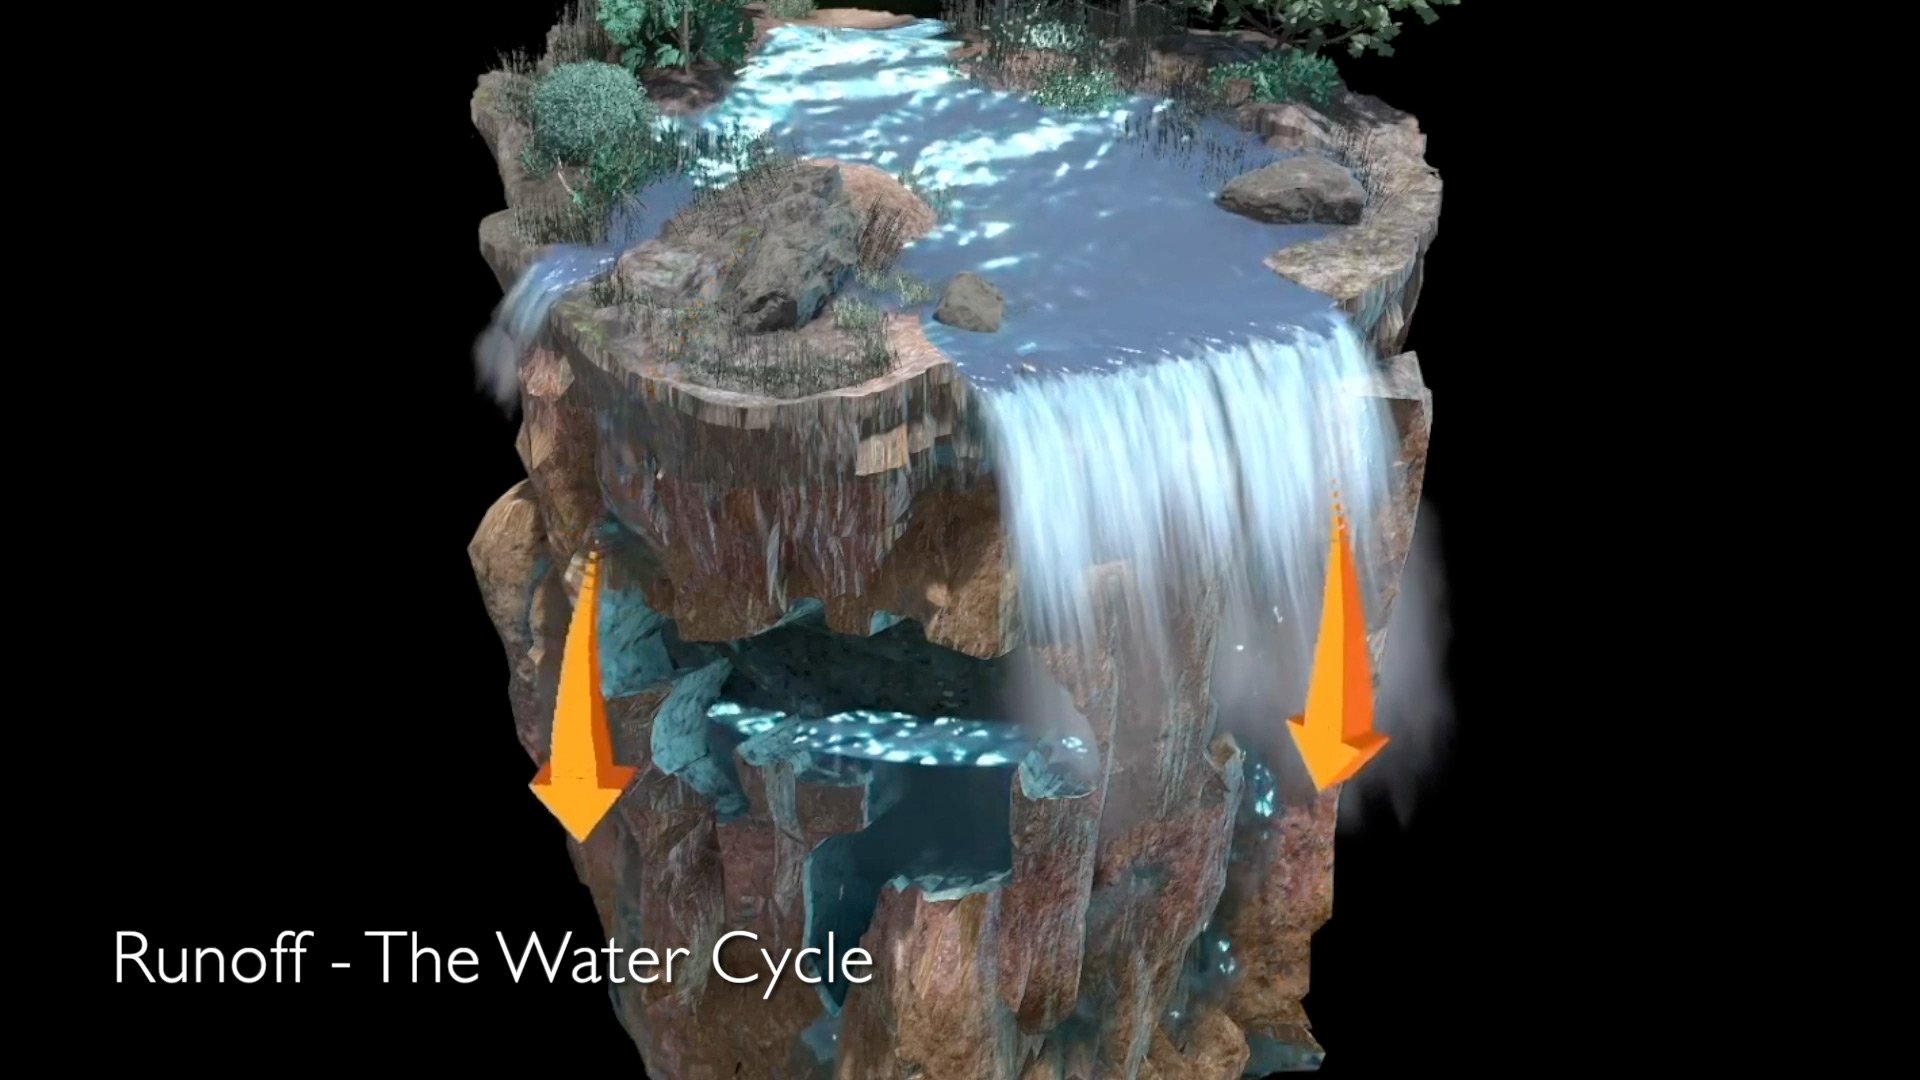    This holographic display vividly captures the final stage of the water cycle, where water flows back to the oceans, ready to begin its cycle anew.   